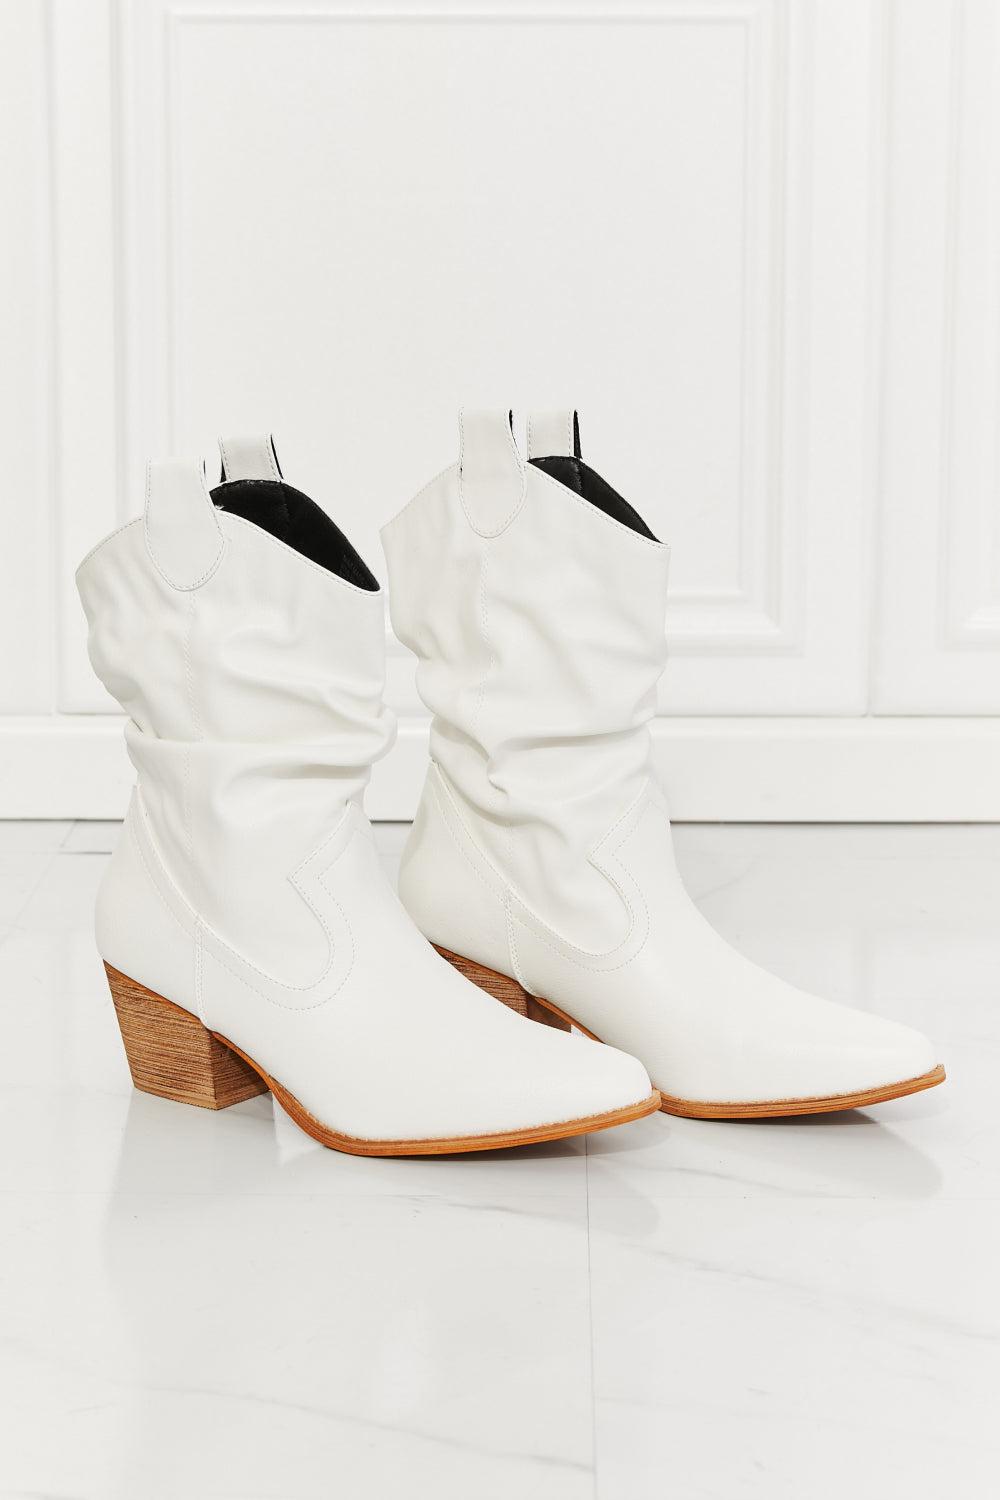 MMShoes Better in Texas Scrunch Cowboy Boots in White BLUE ZONE PLANET